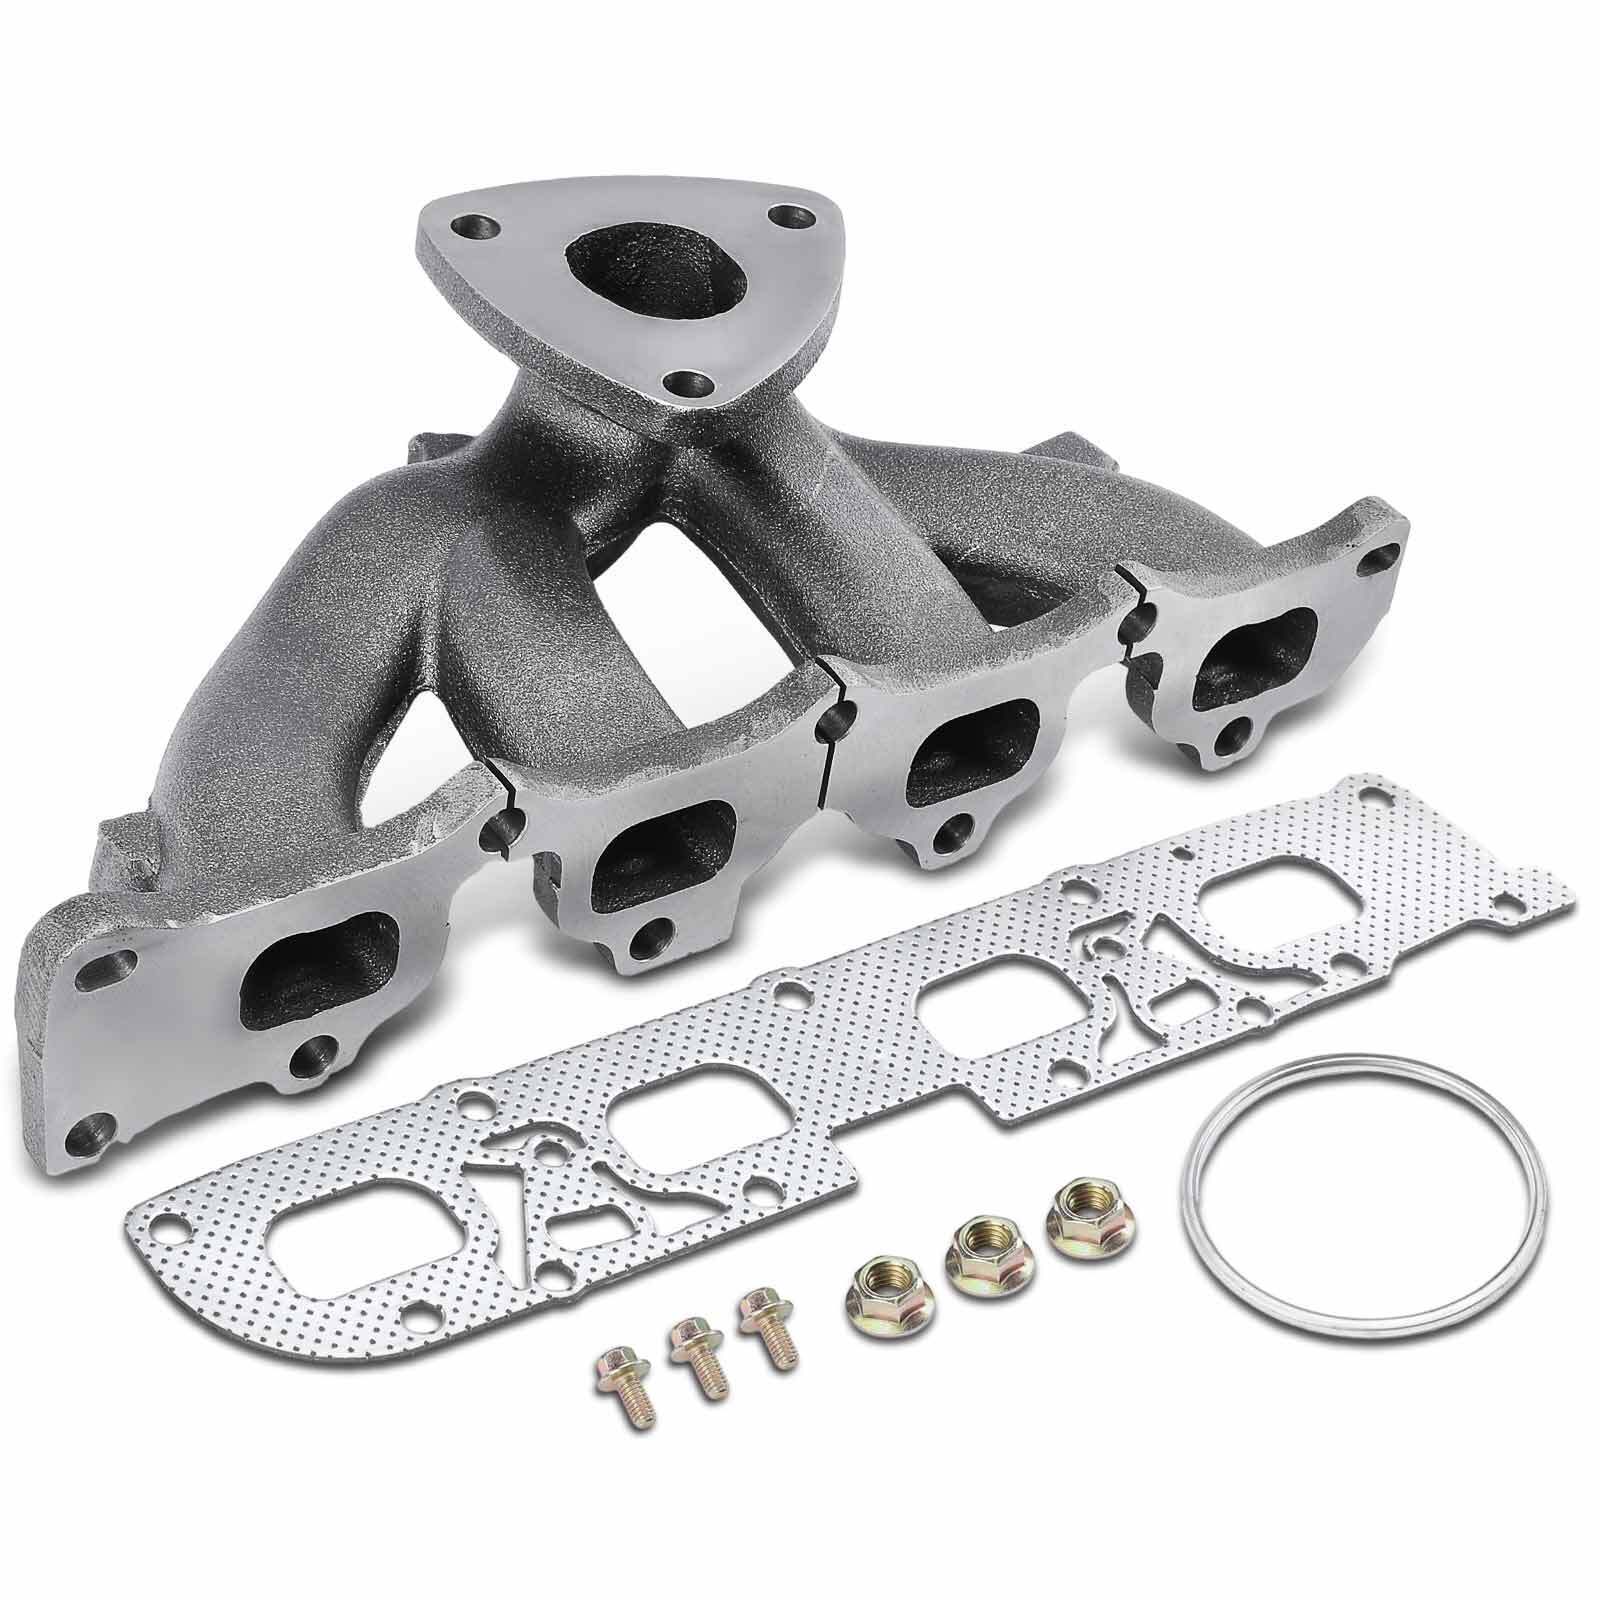 Exhaust Manifold Fits For 2014 2013-2015 Chevy Equinox Captiva GMC Terrain SS